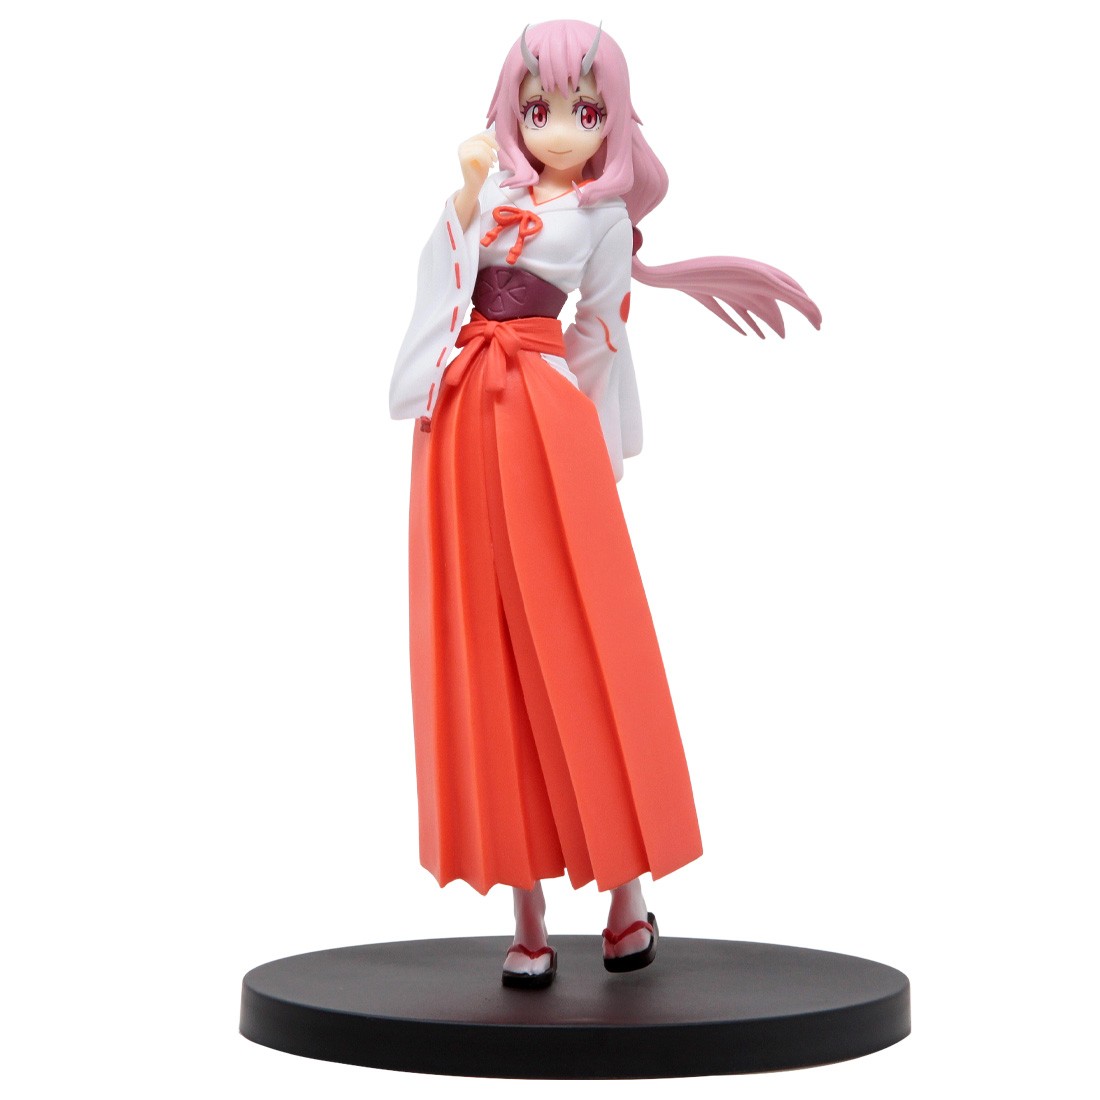 Banpresto all sales are final for collectibles Otherworlder Vol.5 Shuna Figure (pink)